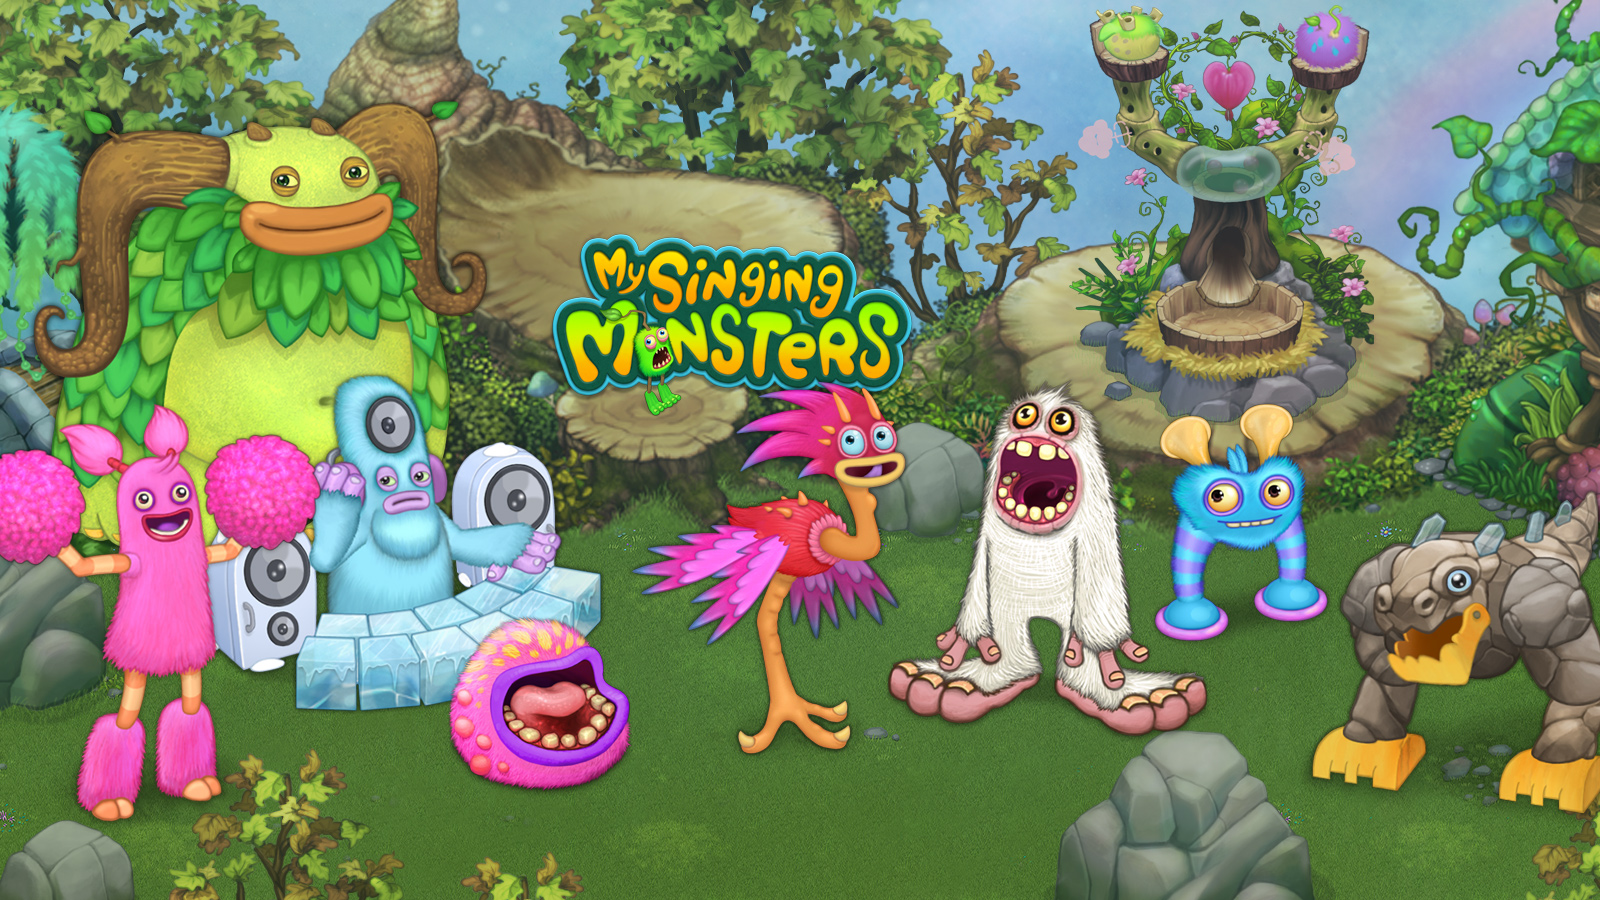 My Singing Monsters Combinations - My Singing Monsters Guide With Pictu...